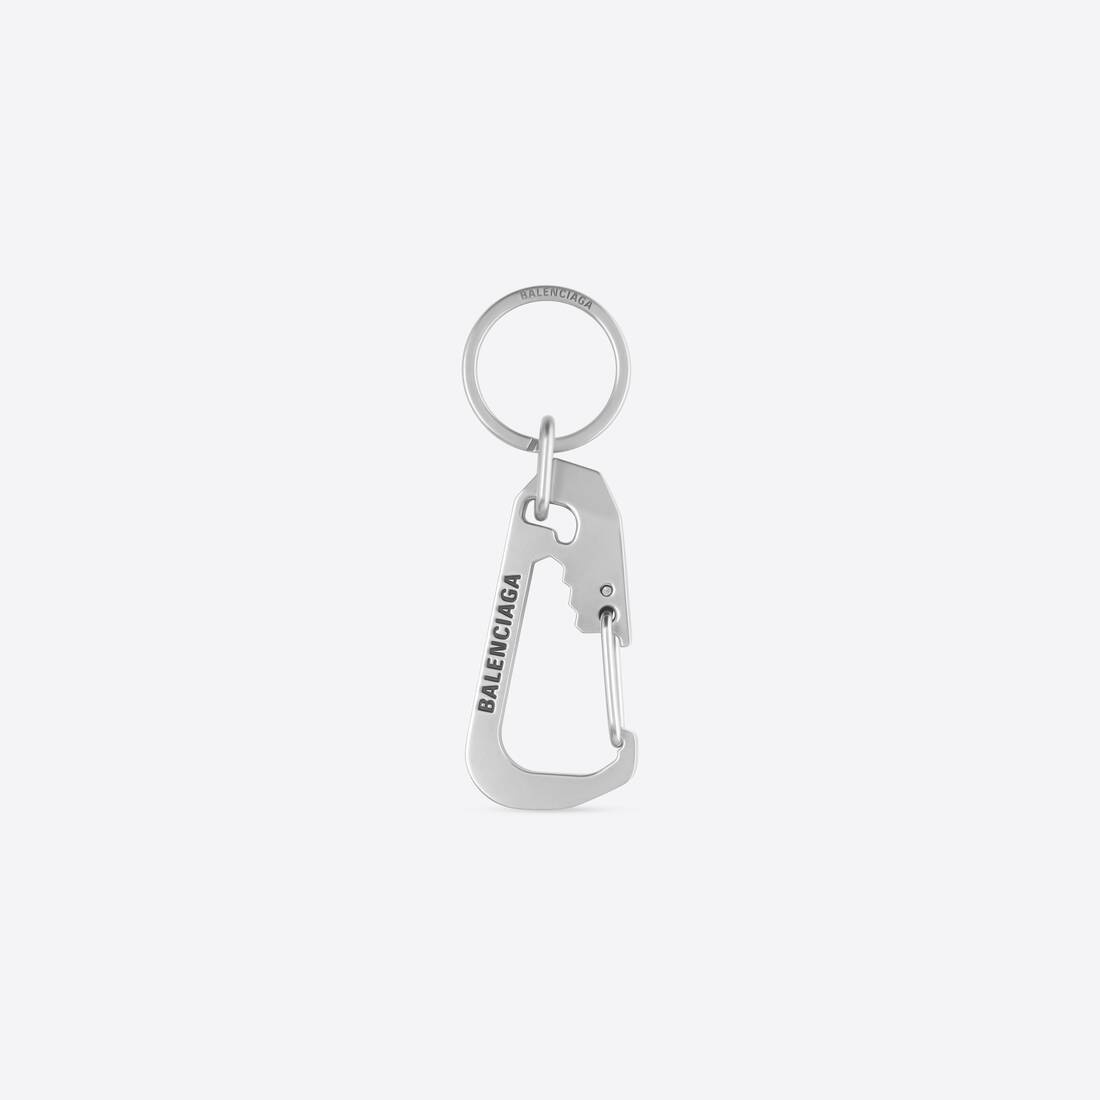 Space Keychain in Silver - 1